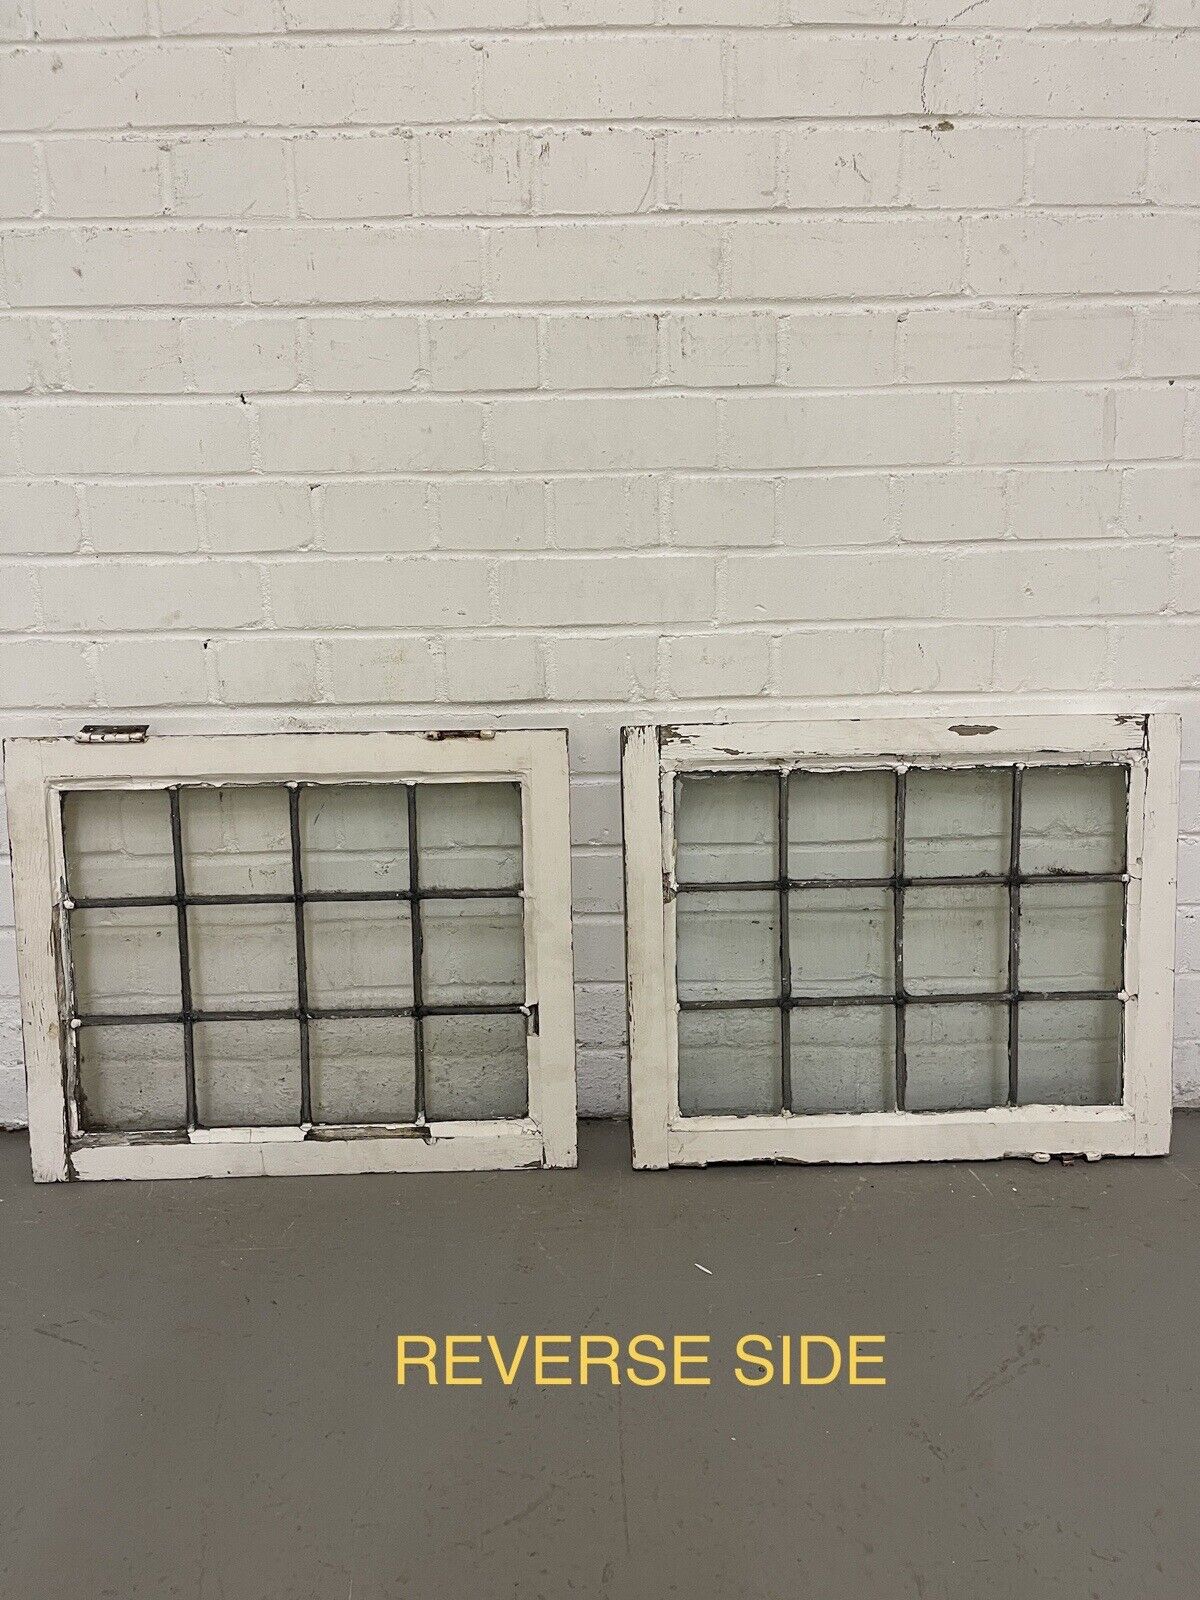 Pair Of Reclaimed Leaded Light Panel Wooden Windows 450 x 555mm 450 x 555mm